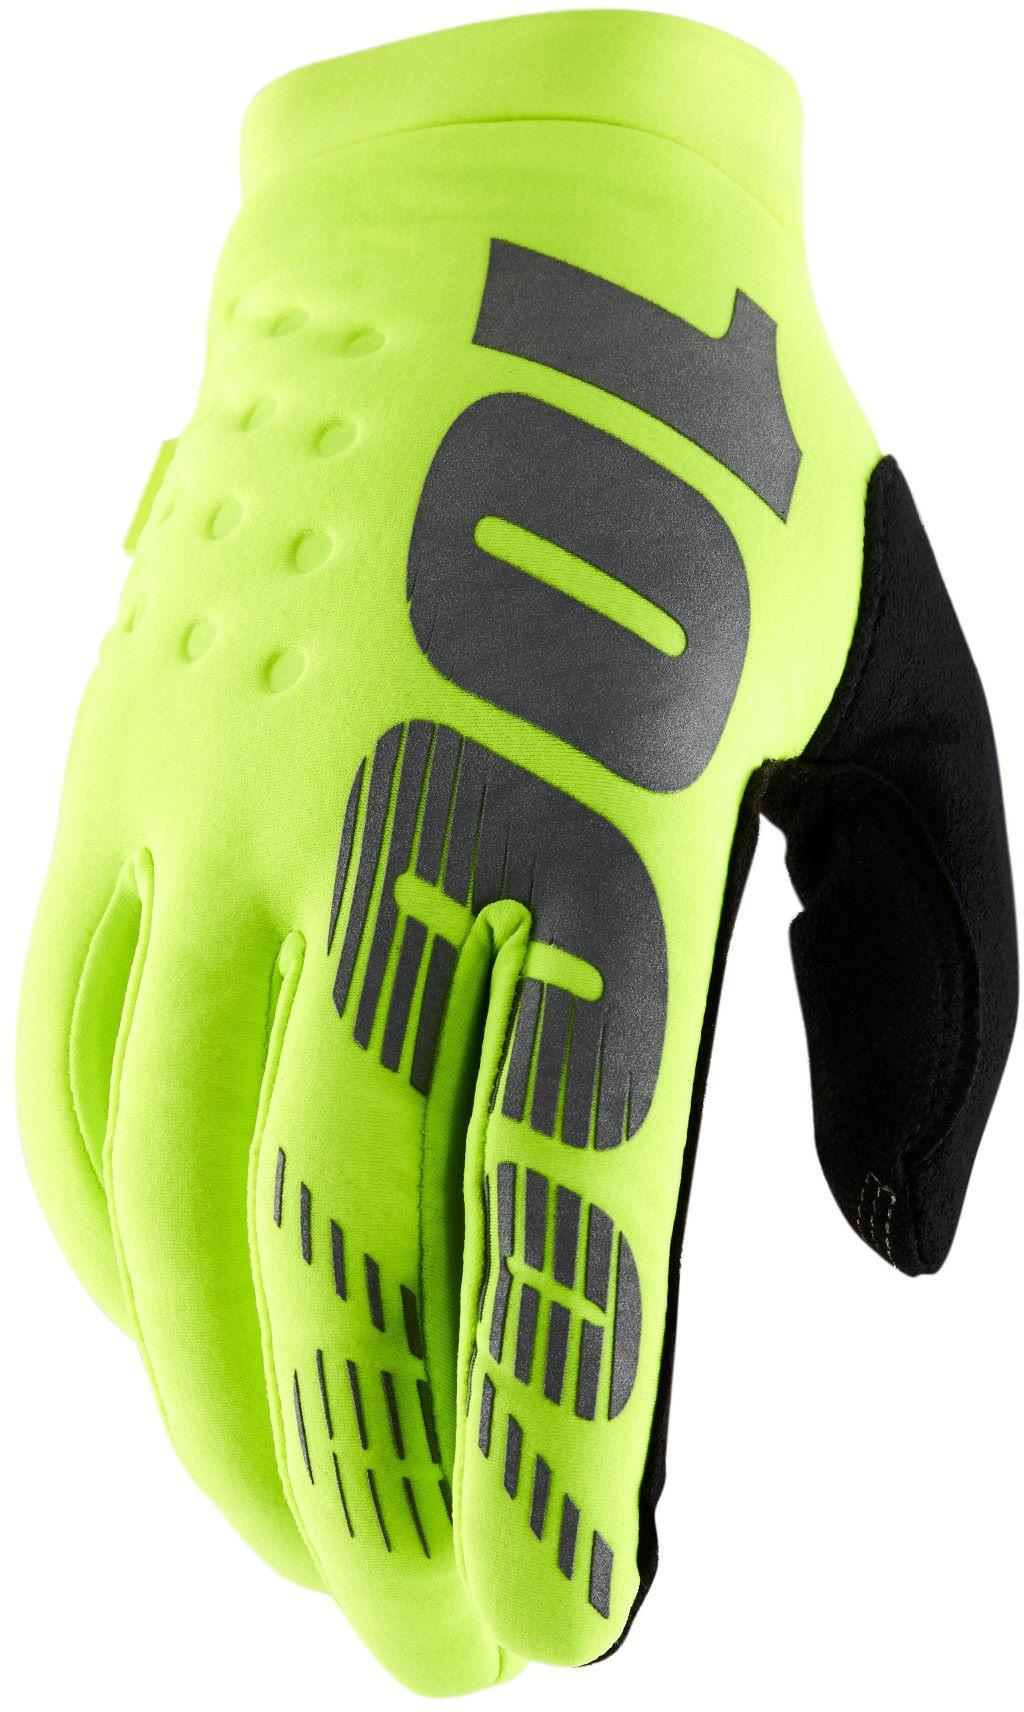 100% Brisker Youth Gloves Ss19  Fluorescent/yellow